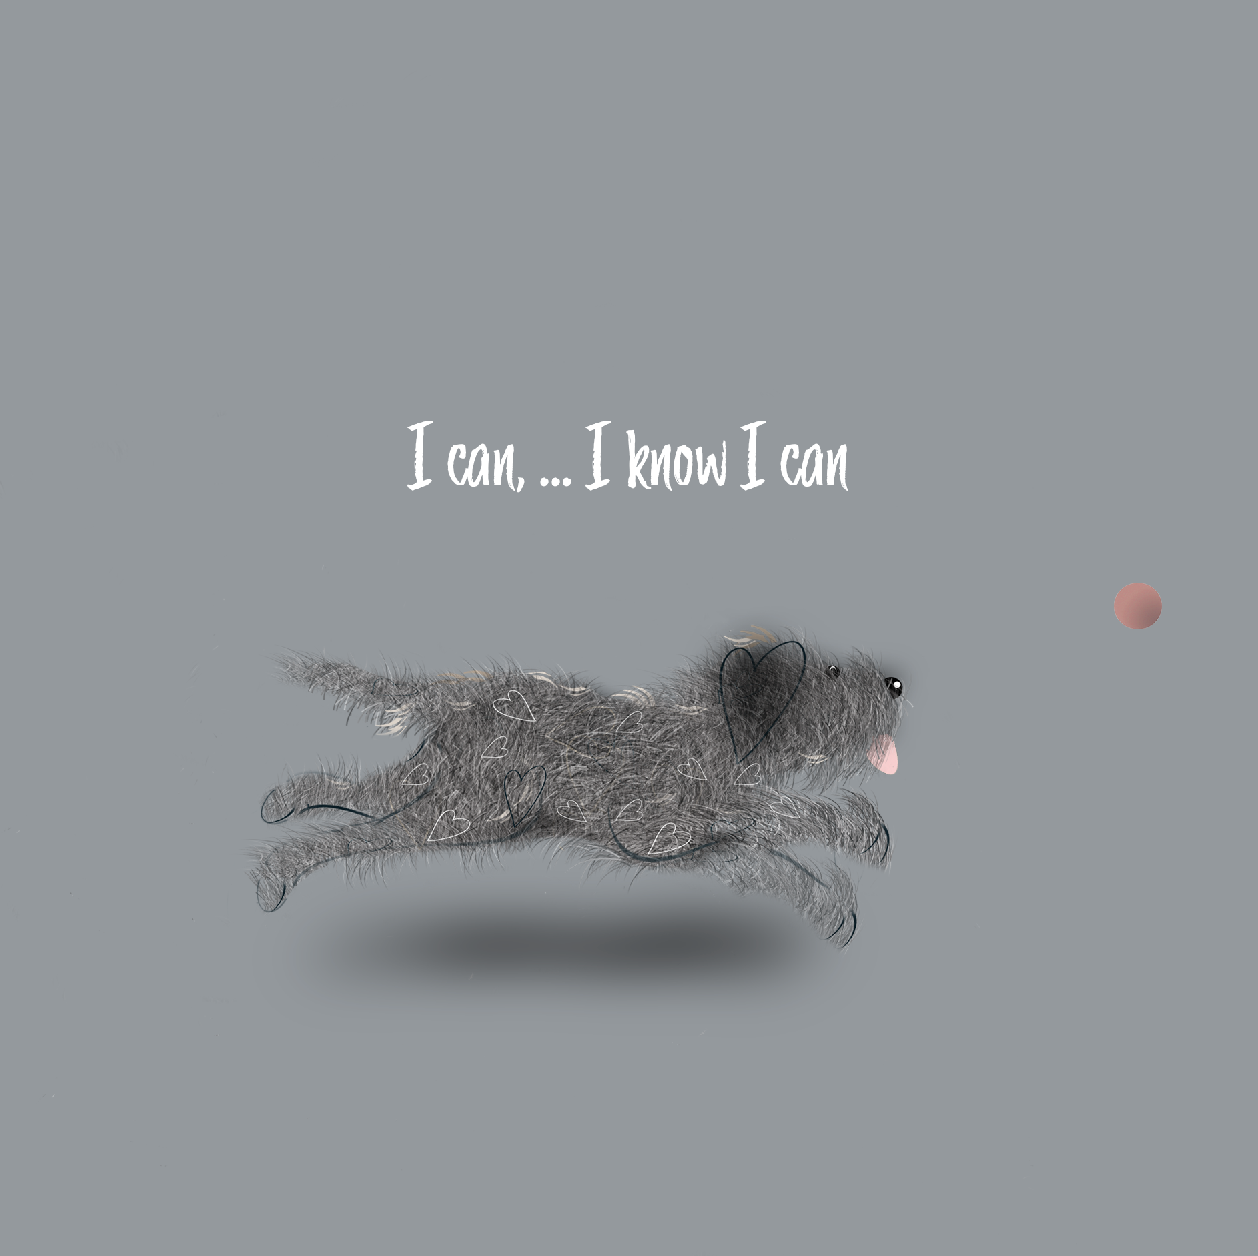 I can, I know I can!